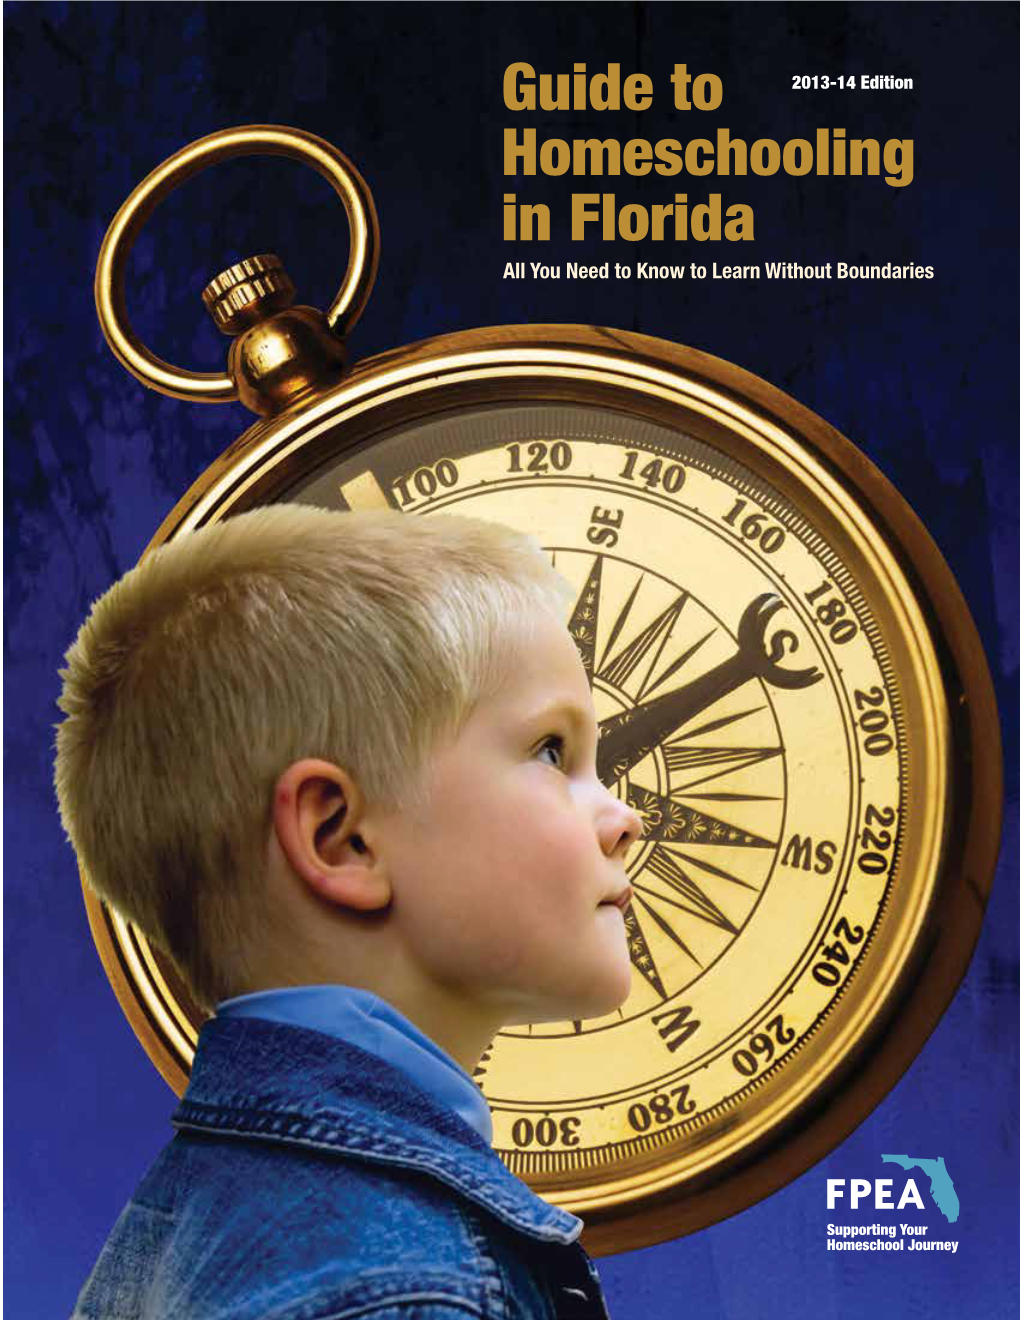 Guide to Homeschooling in Florida